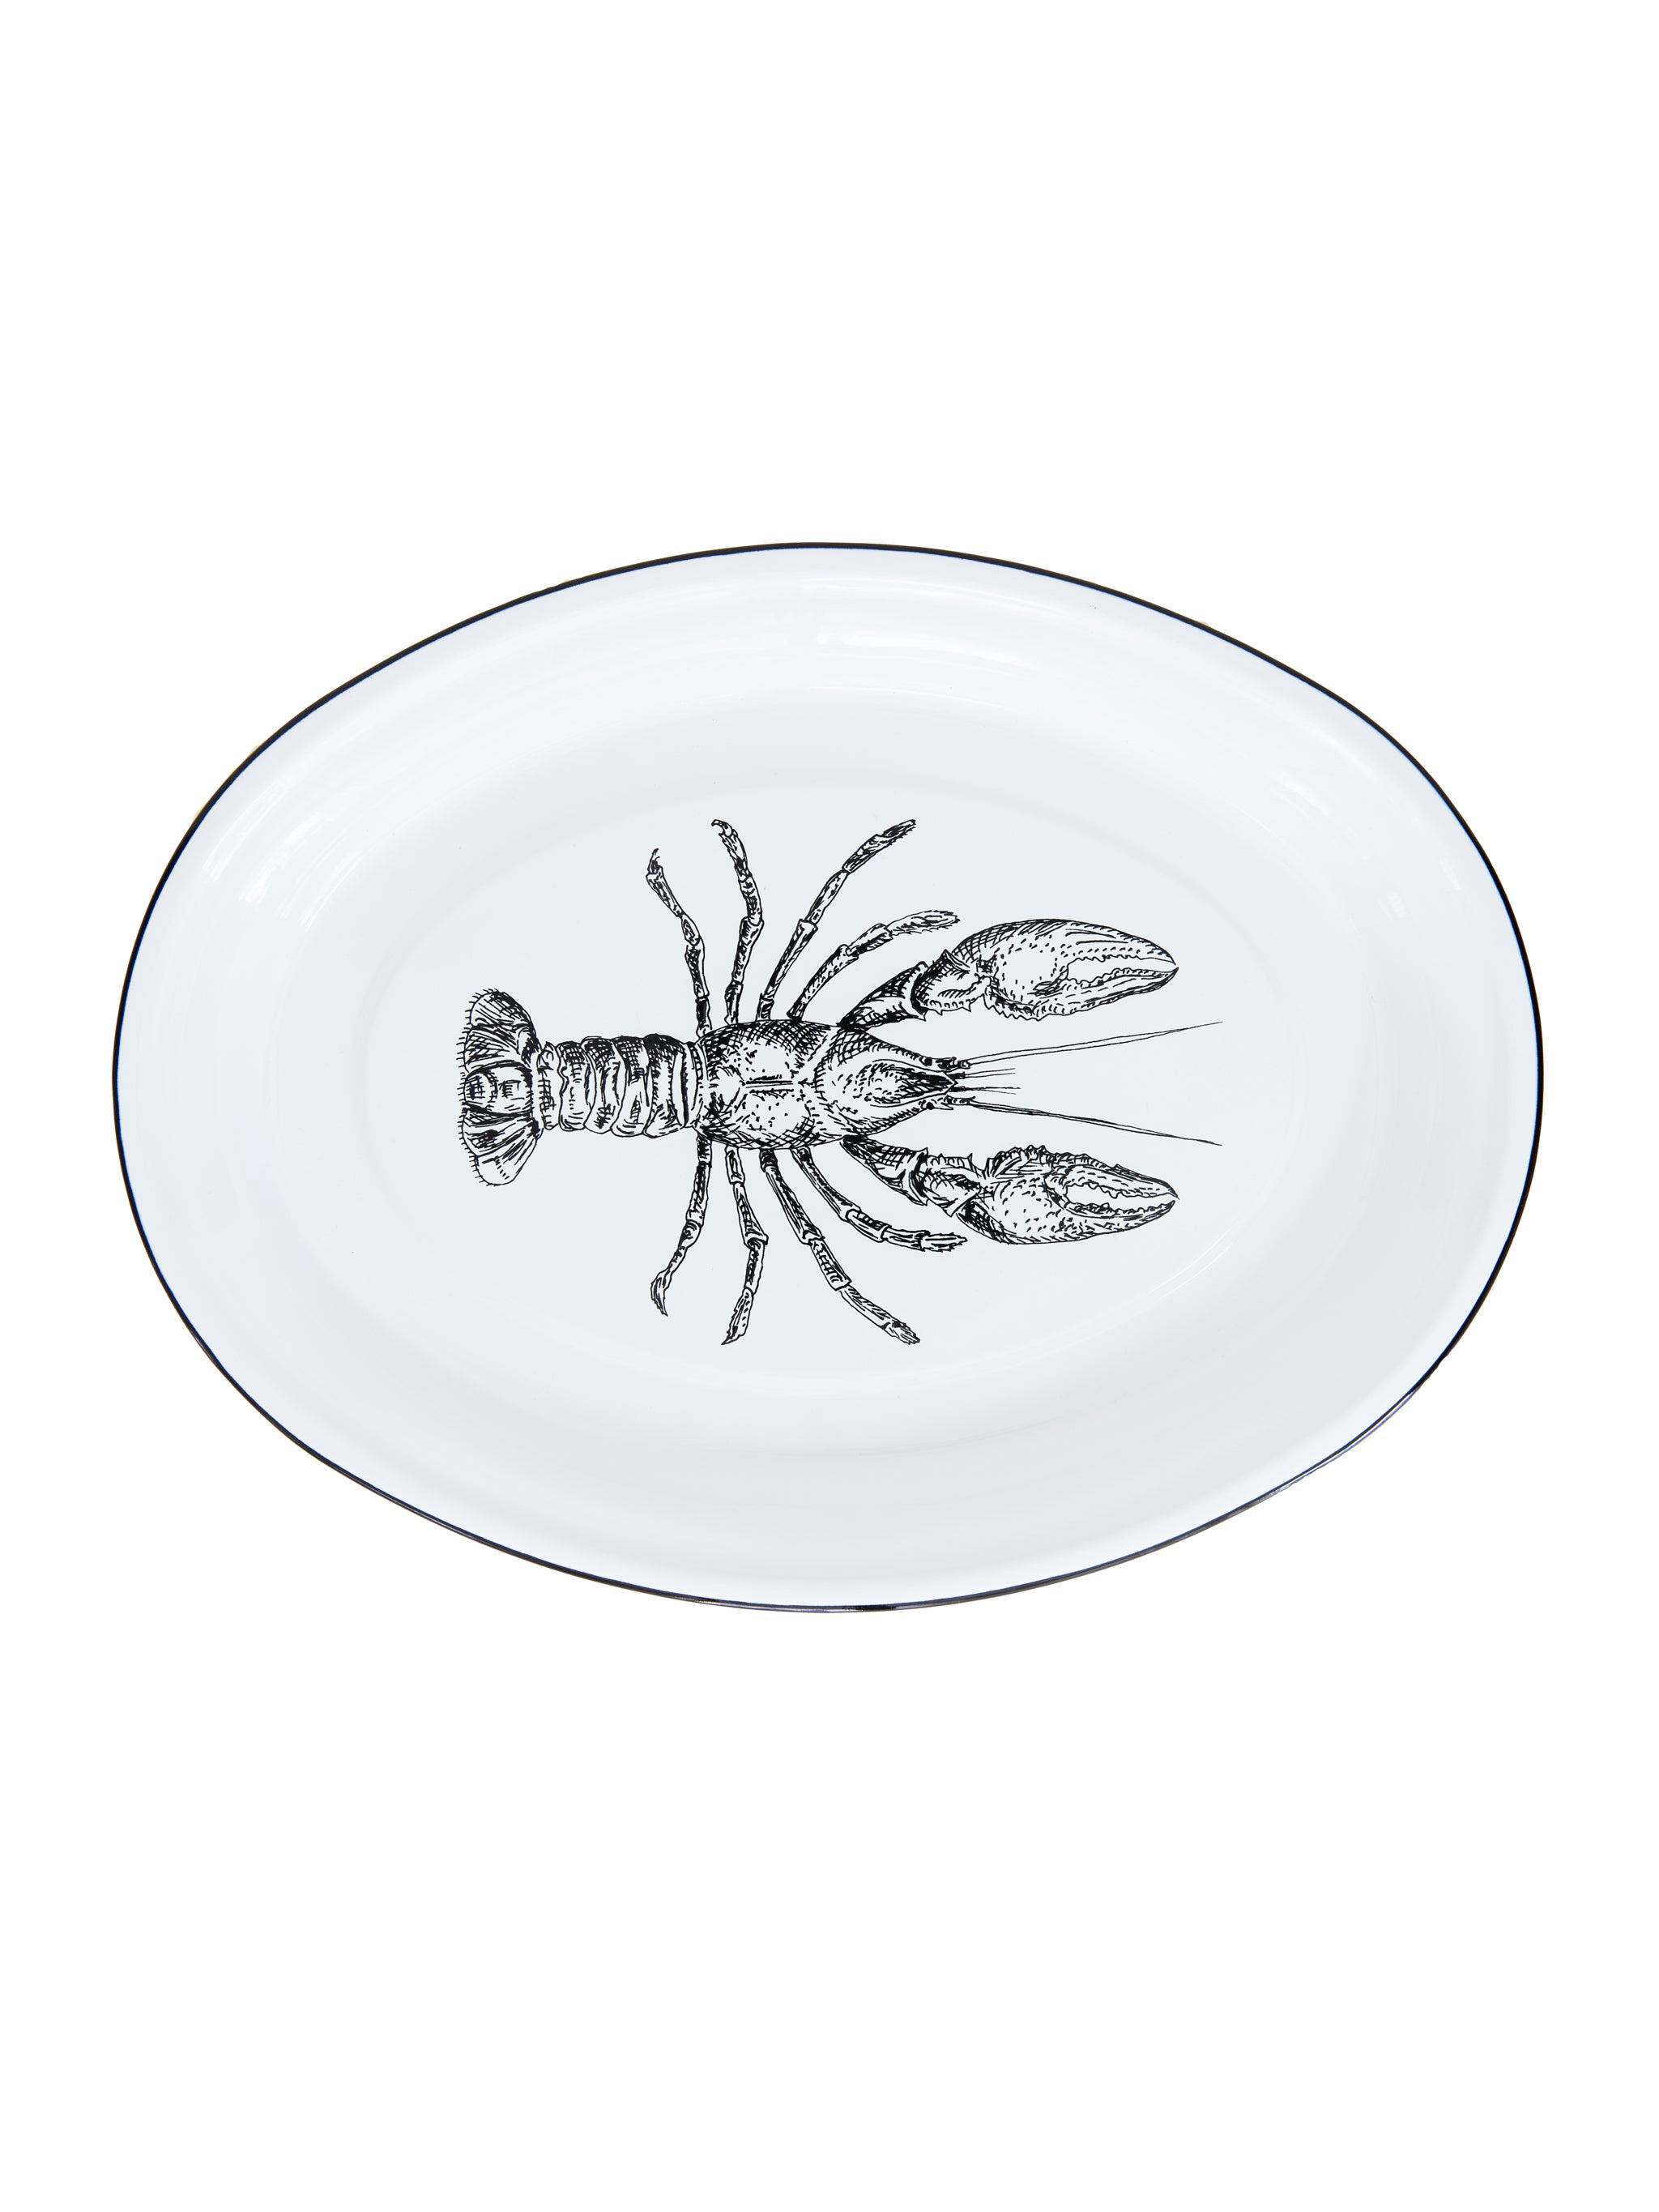 wt-x-crow-canyon-lobster-oval-tray-weston-table